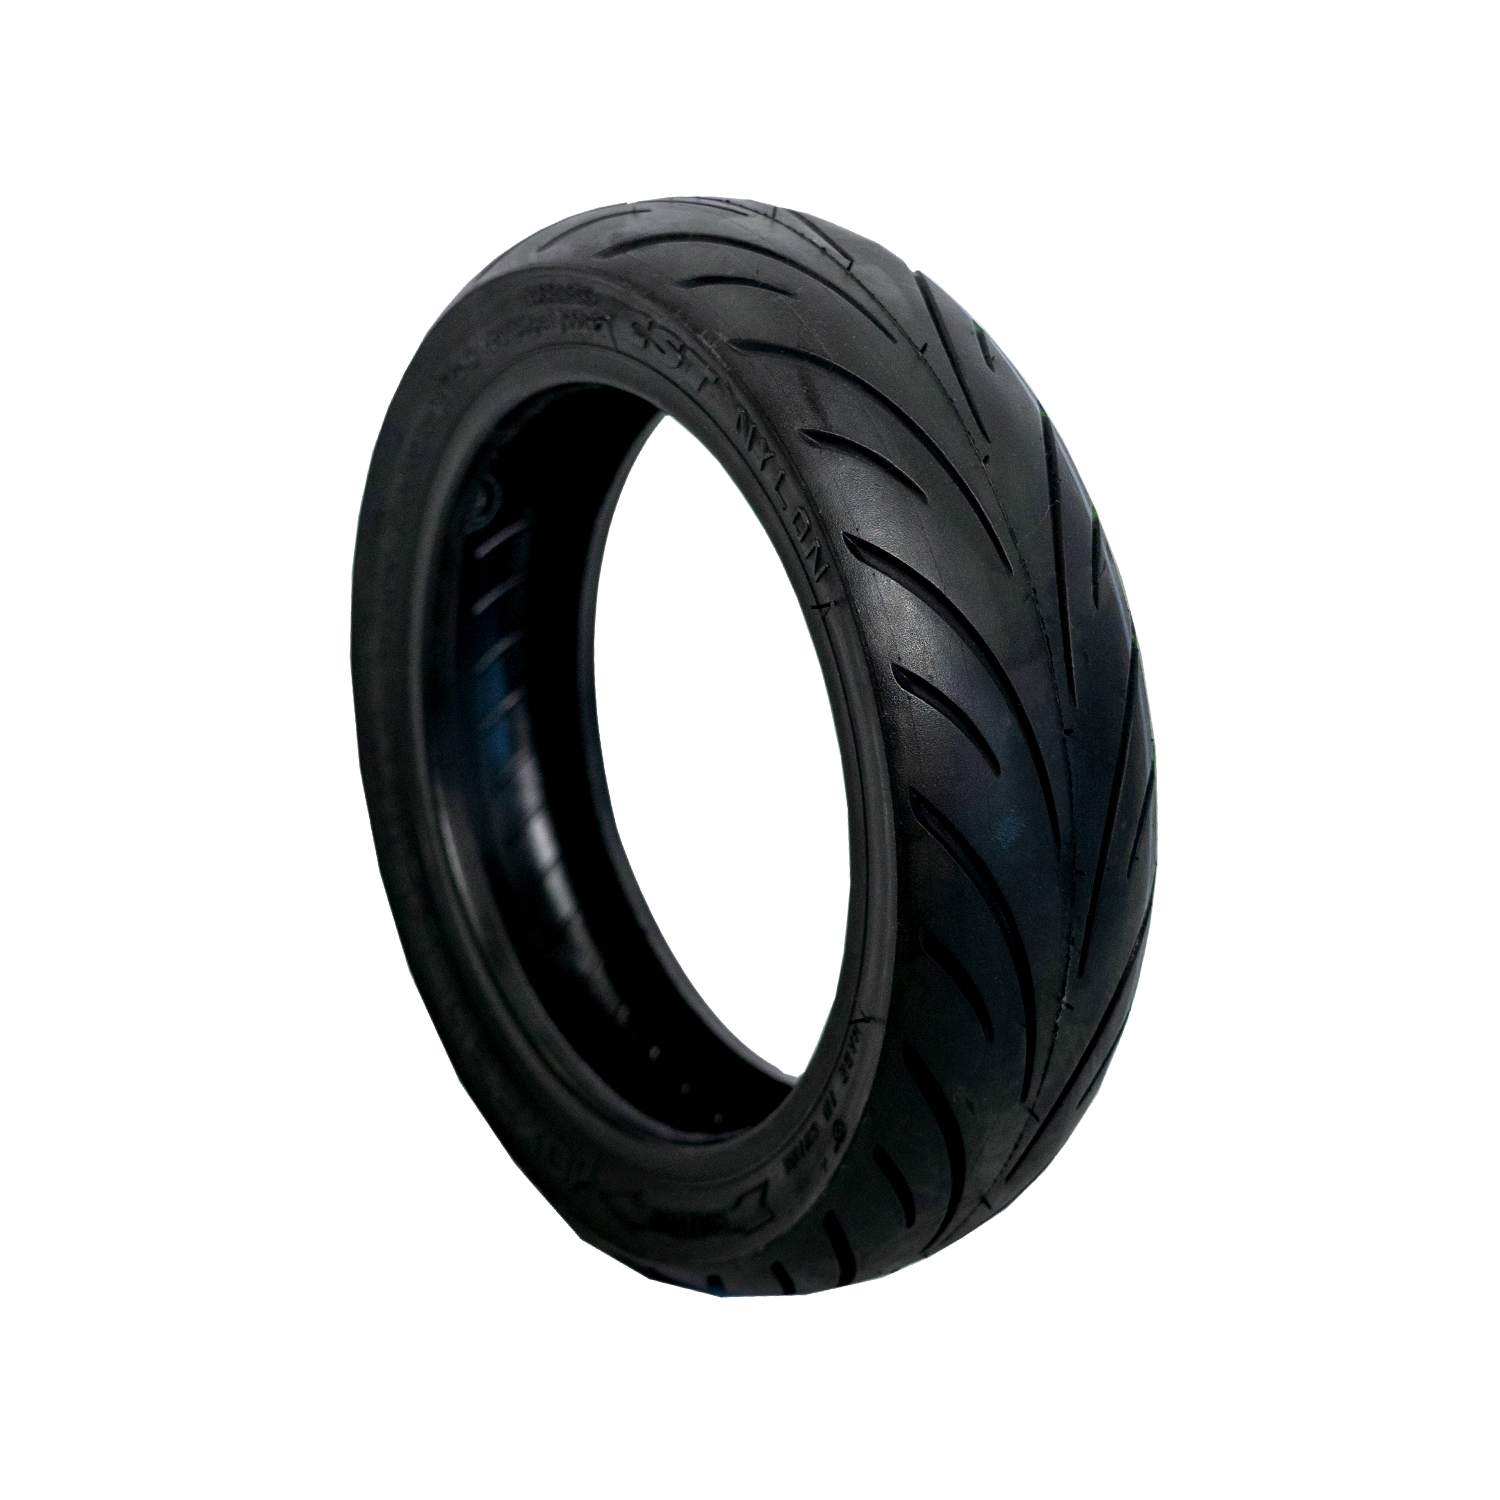 NIU tires for KQi3 Scooters